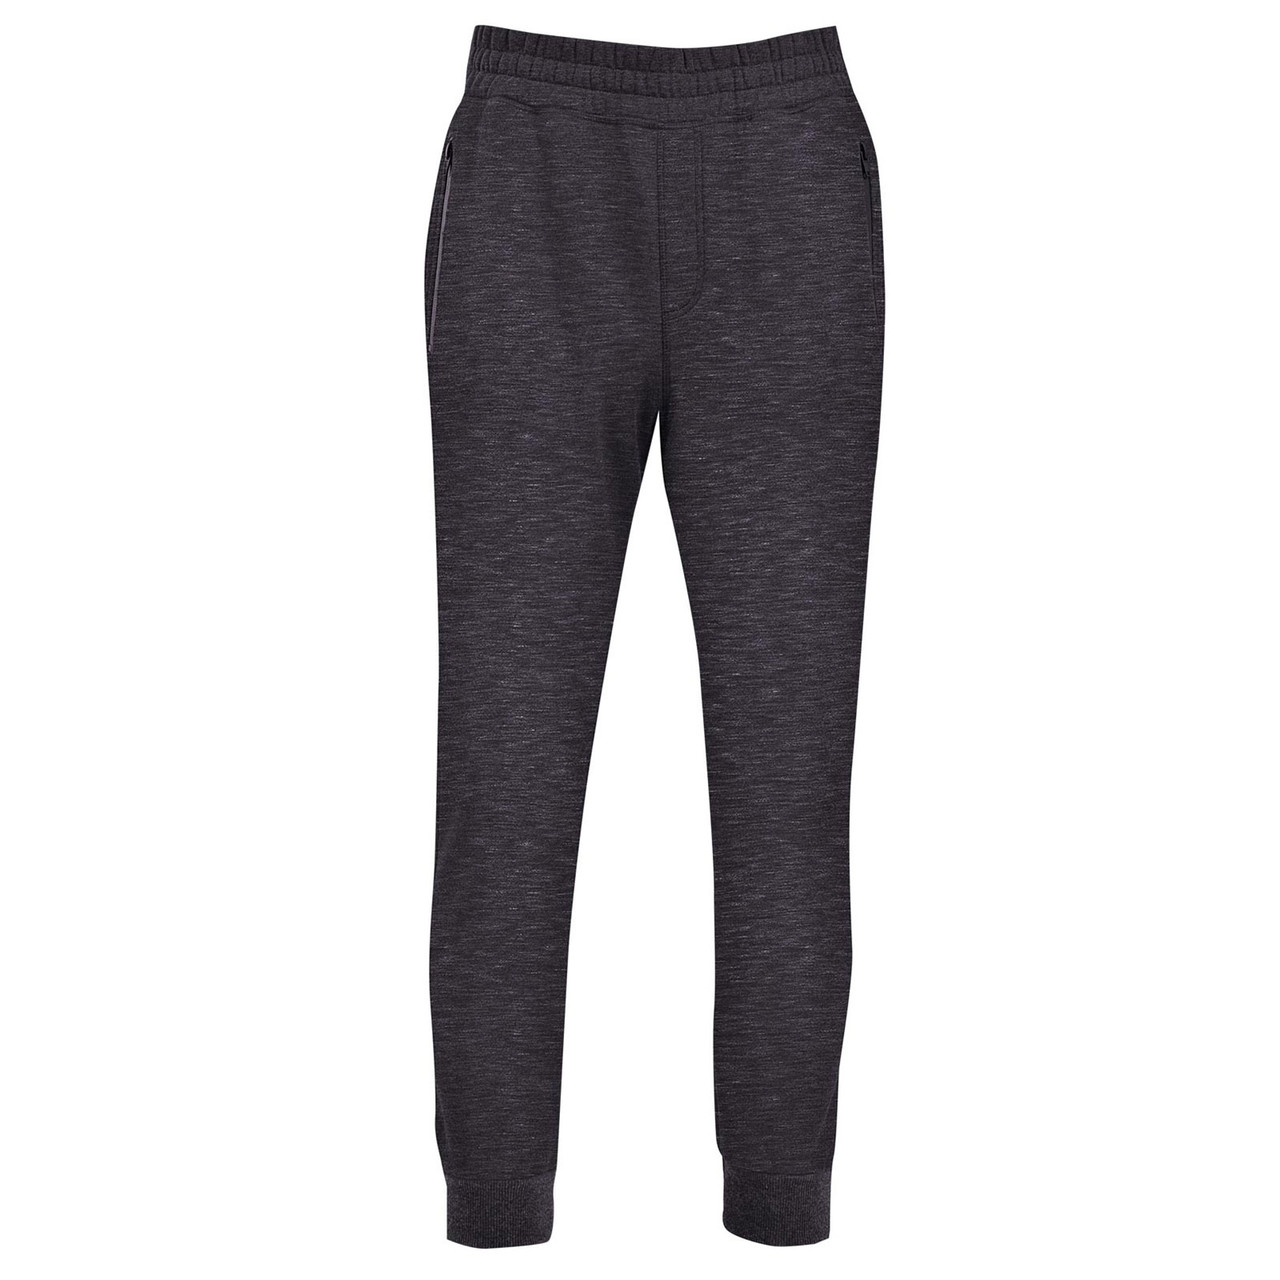 STANCE | Mens Fleecy Thick Jogger Track Pants - Blank Clothing